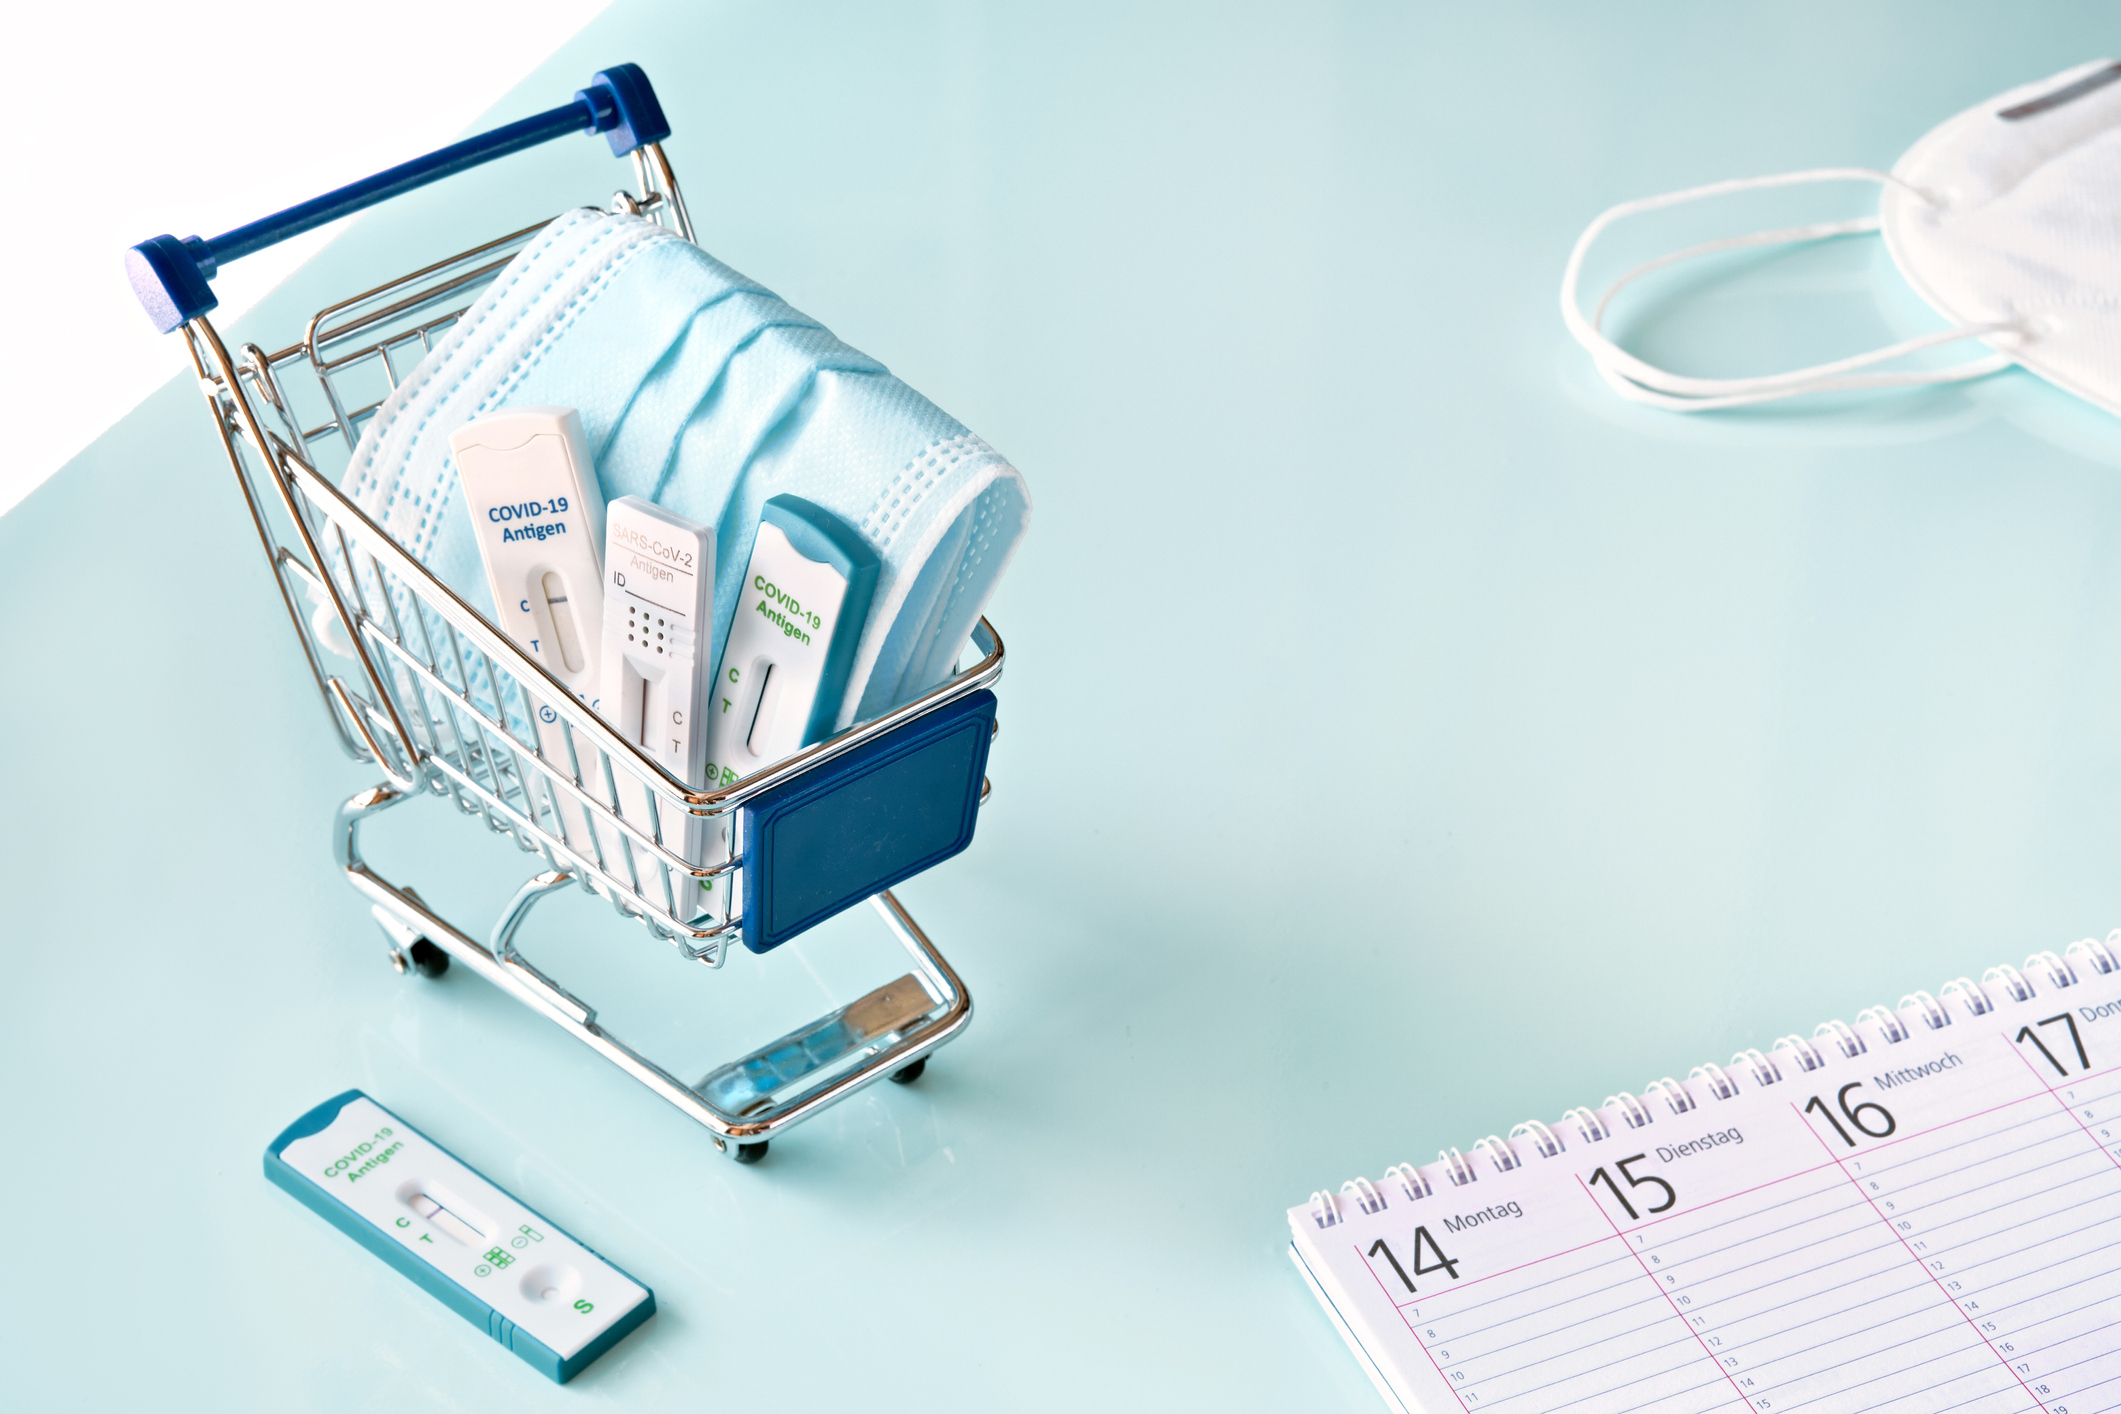 Mini shopping cart with COVID tests and masks inside